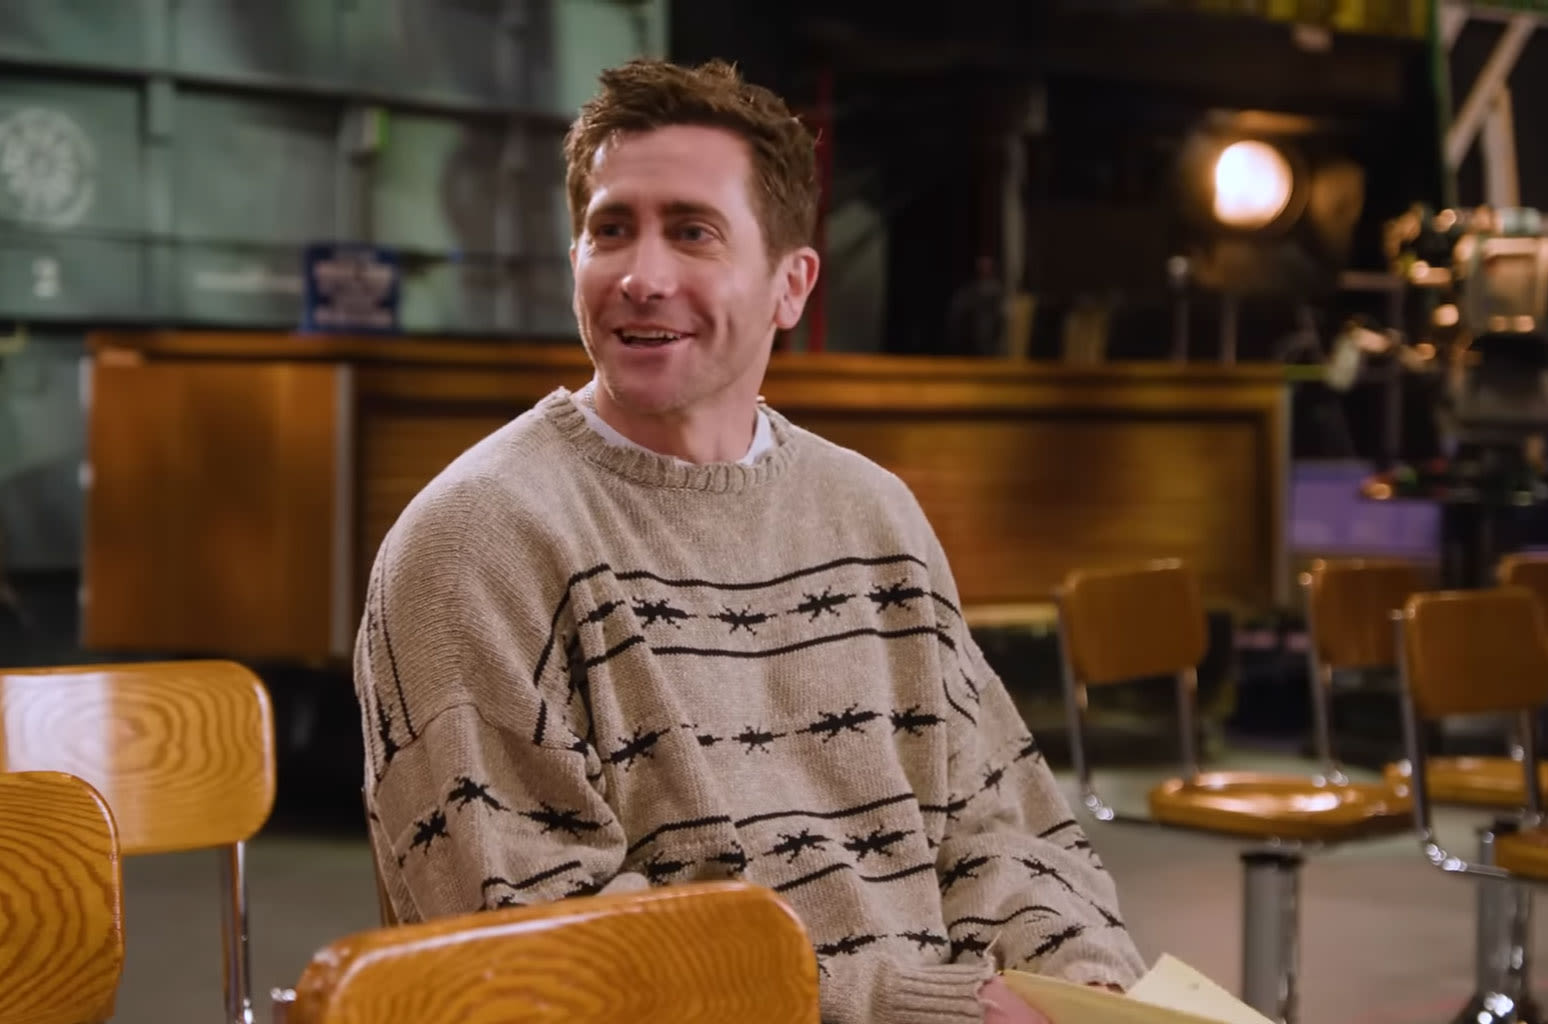 Jake Gyllenhaal Puts a Lot of Effort Into Signing ‘SNL’ Yearbook in New Promo